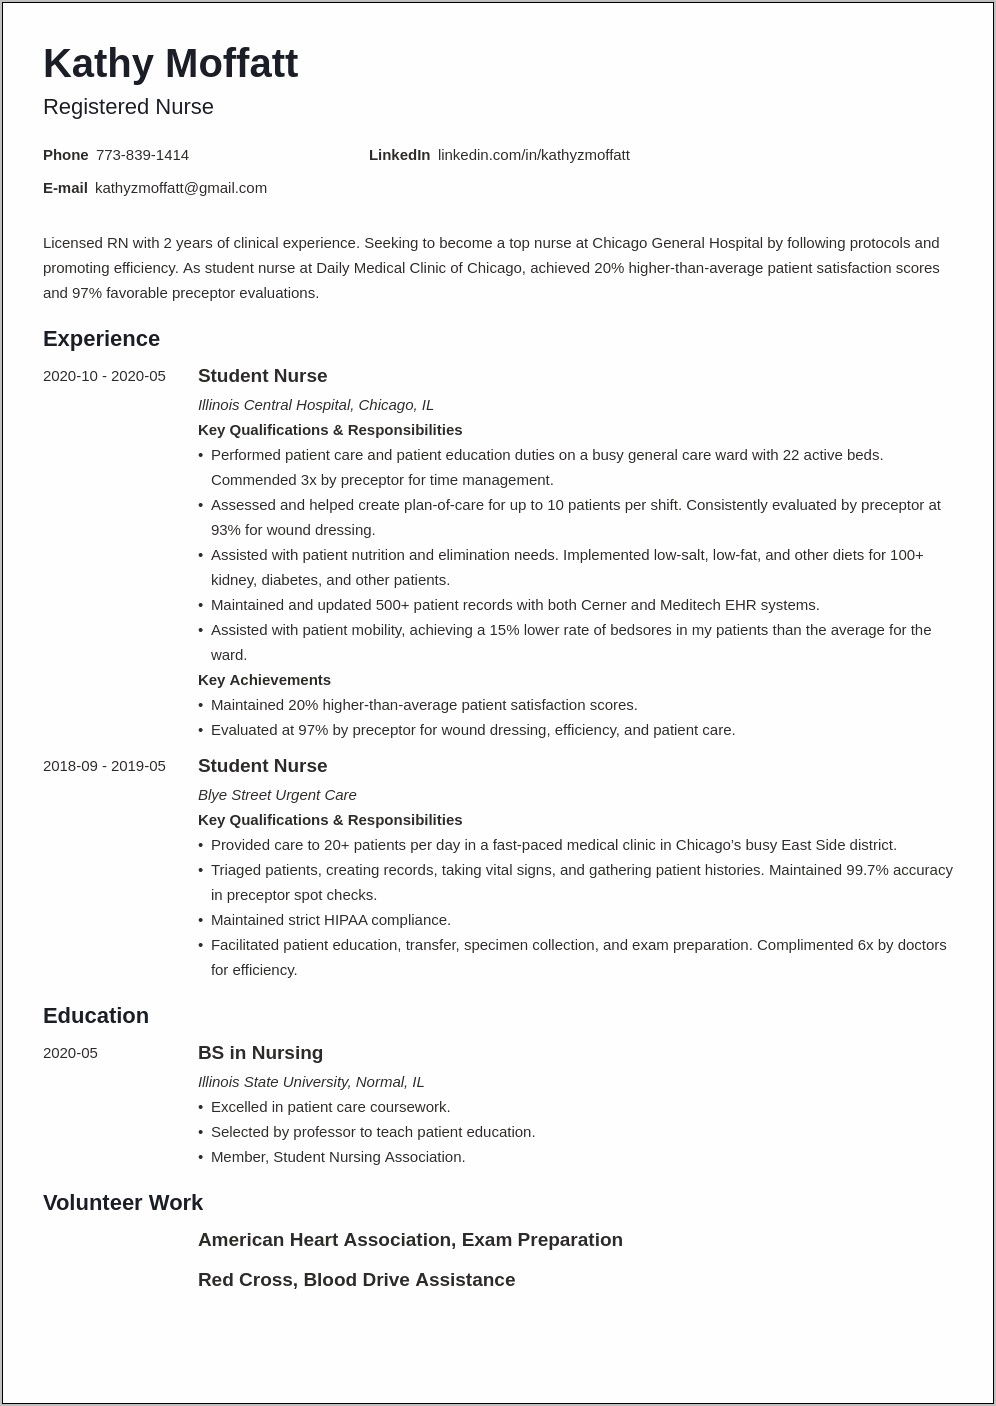 Resume Objective For New Grad